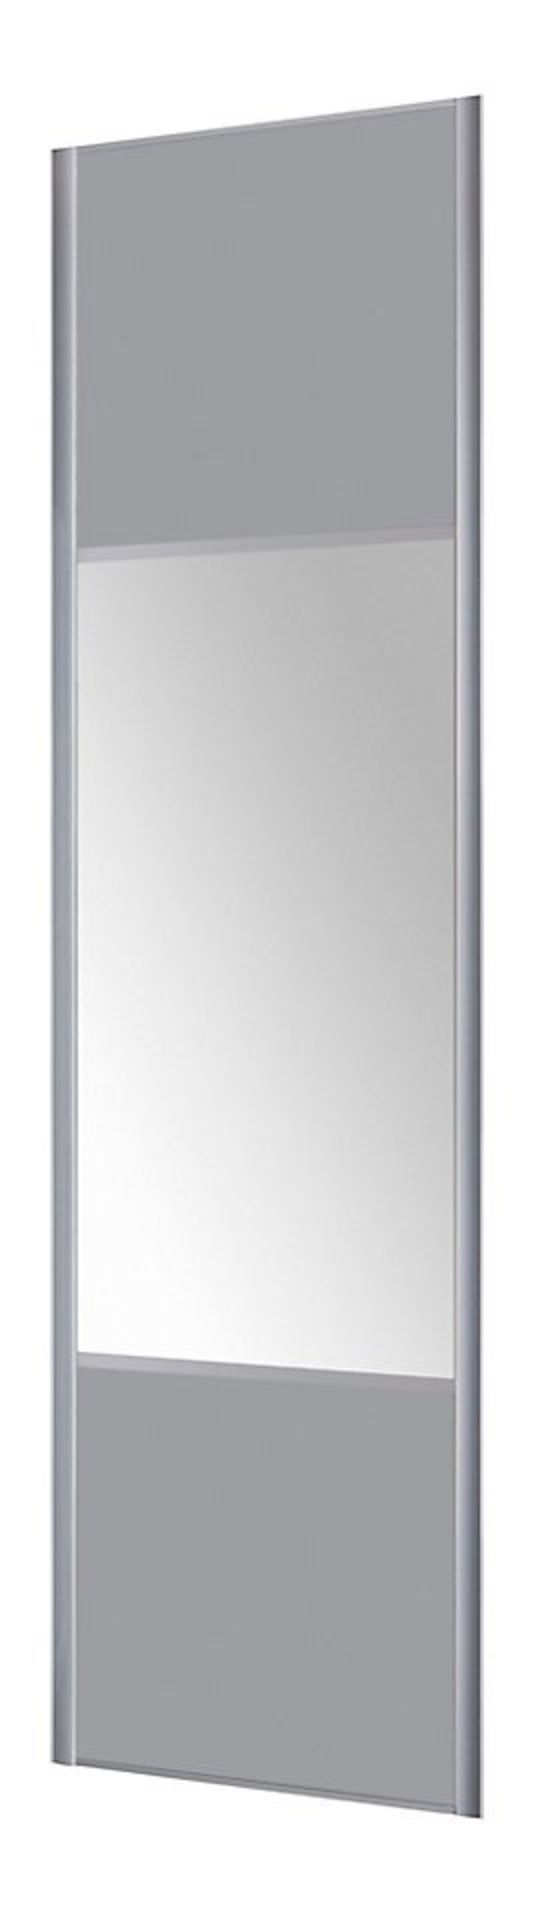 1 x VALLA 1 Sliding Wardrobe Door In Light Grey With A Silver Mirror With Grey Lacquered Steel Profi